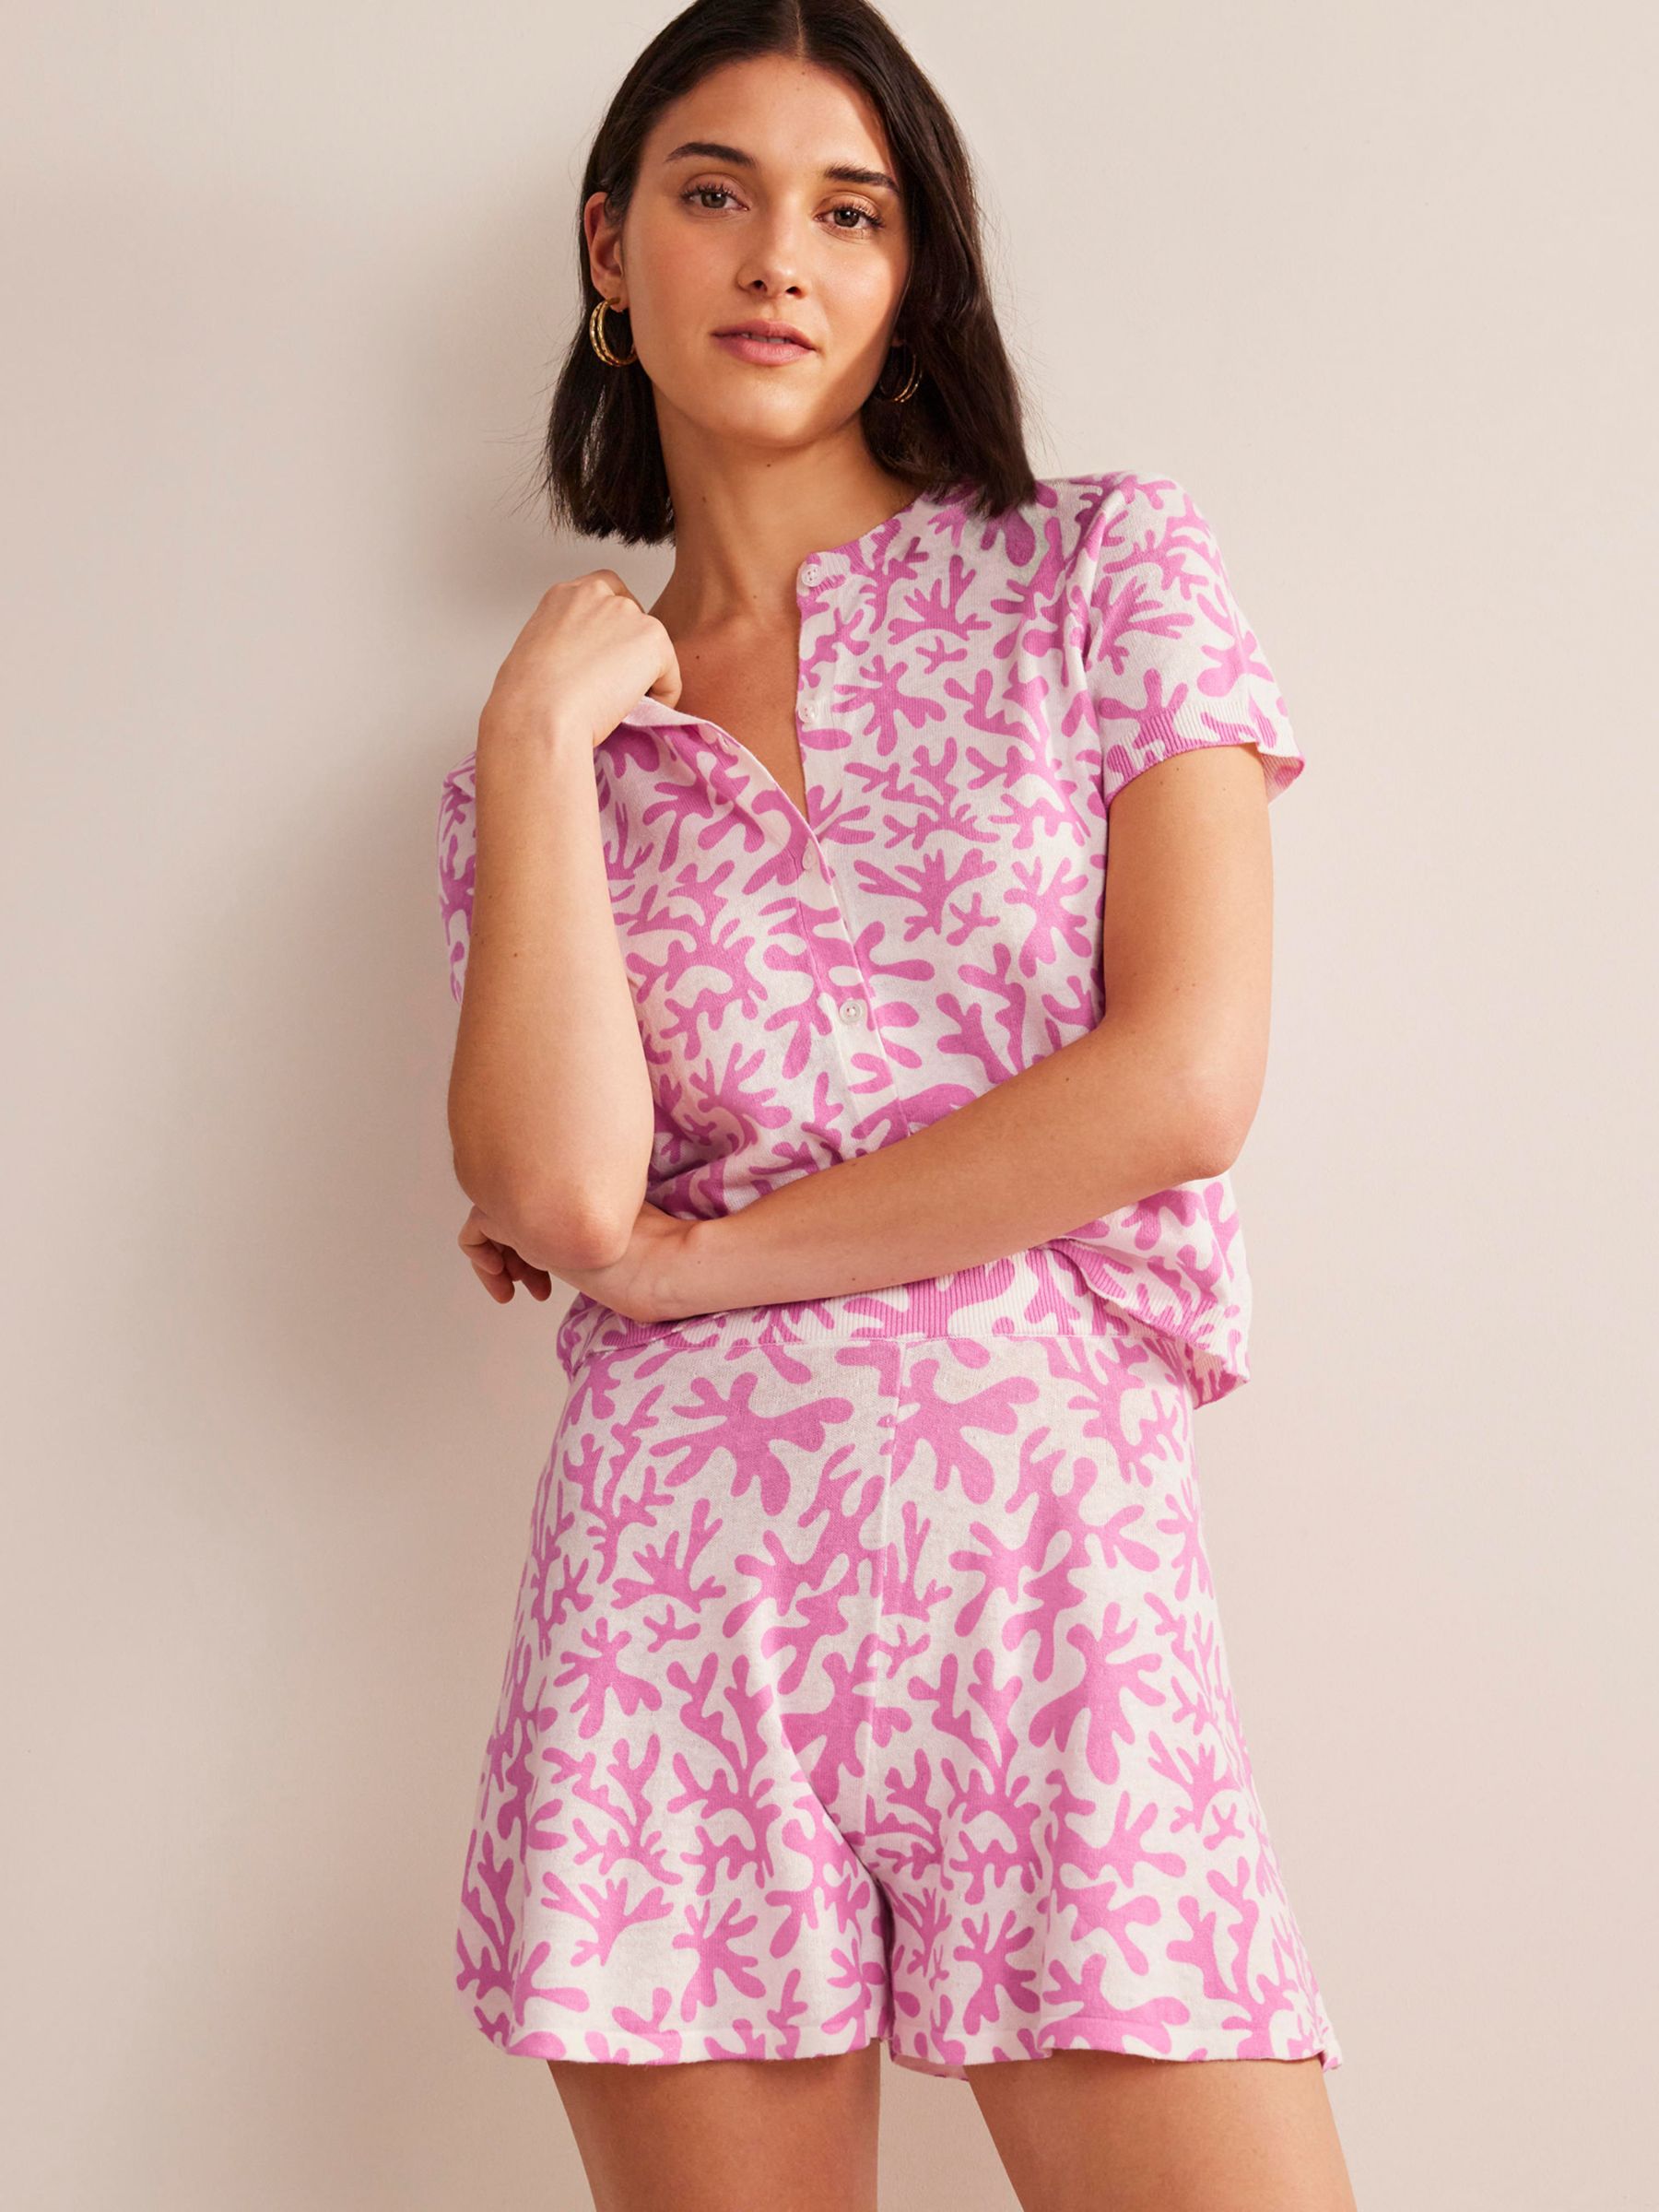 Boden's pink linen suit is perfect for spring